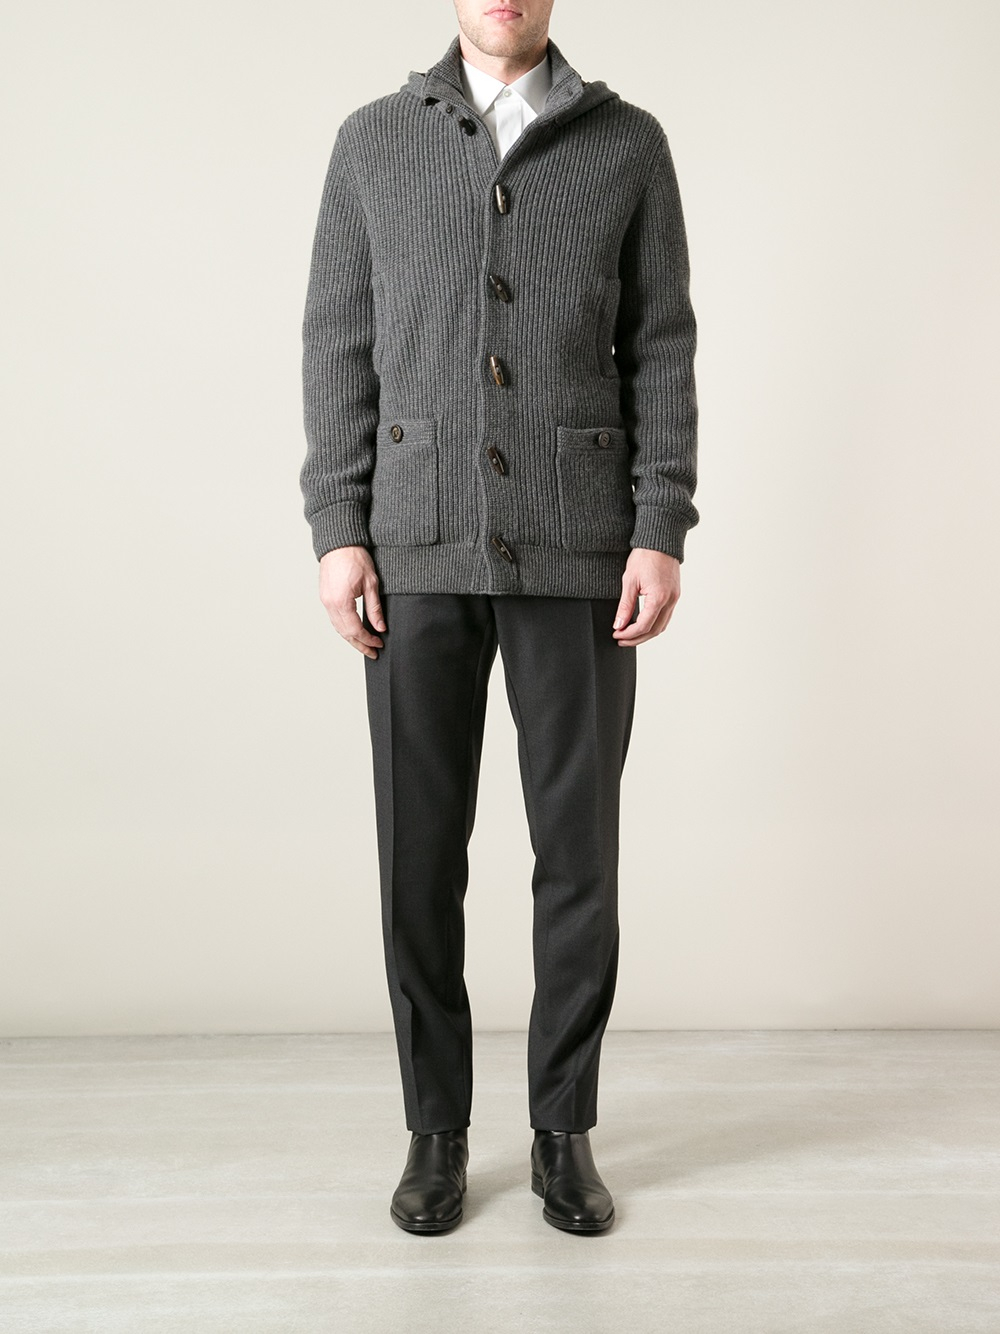 Lyst - Brunello Cucinelli Hooded Cardigan in Gray for Men